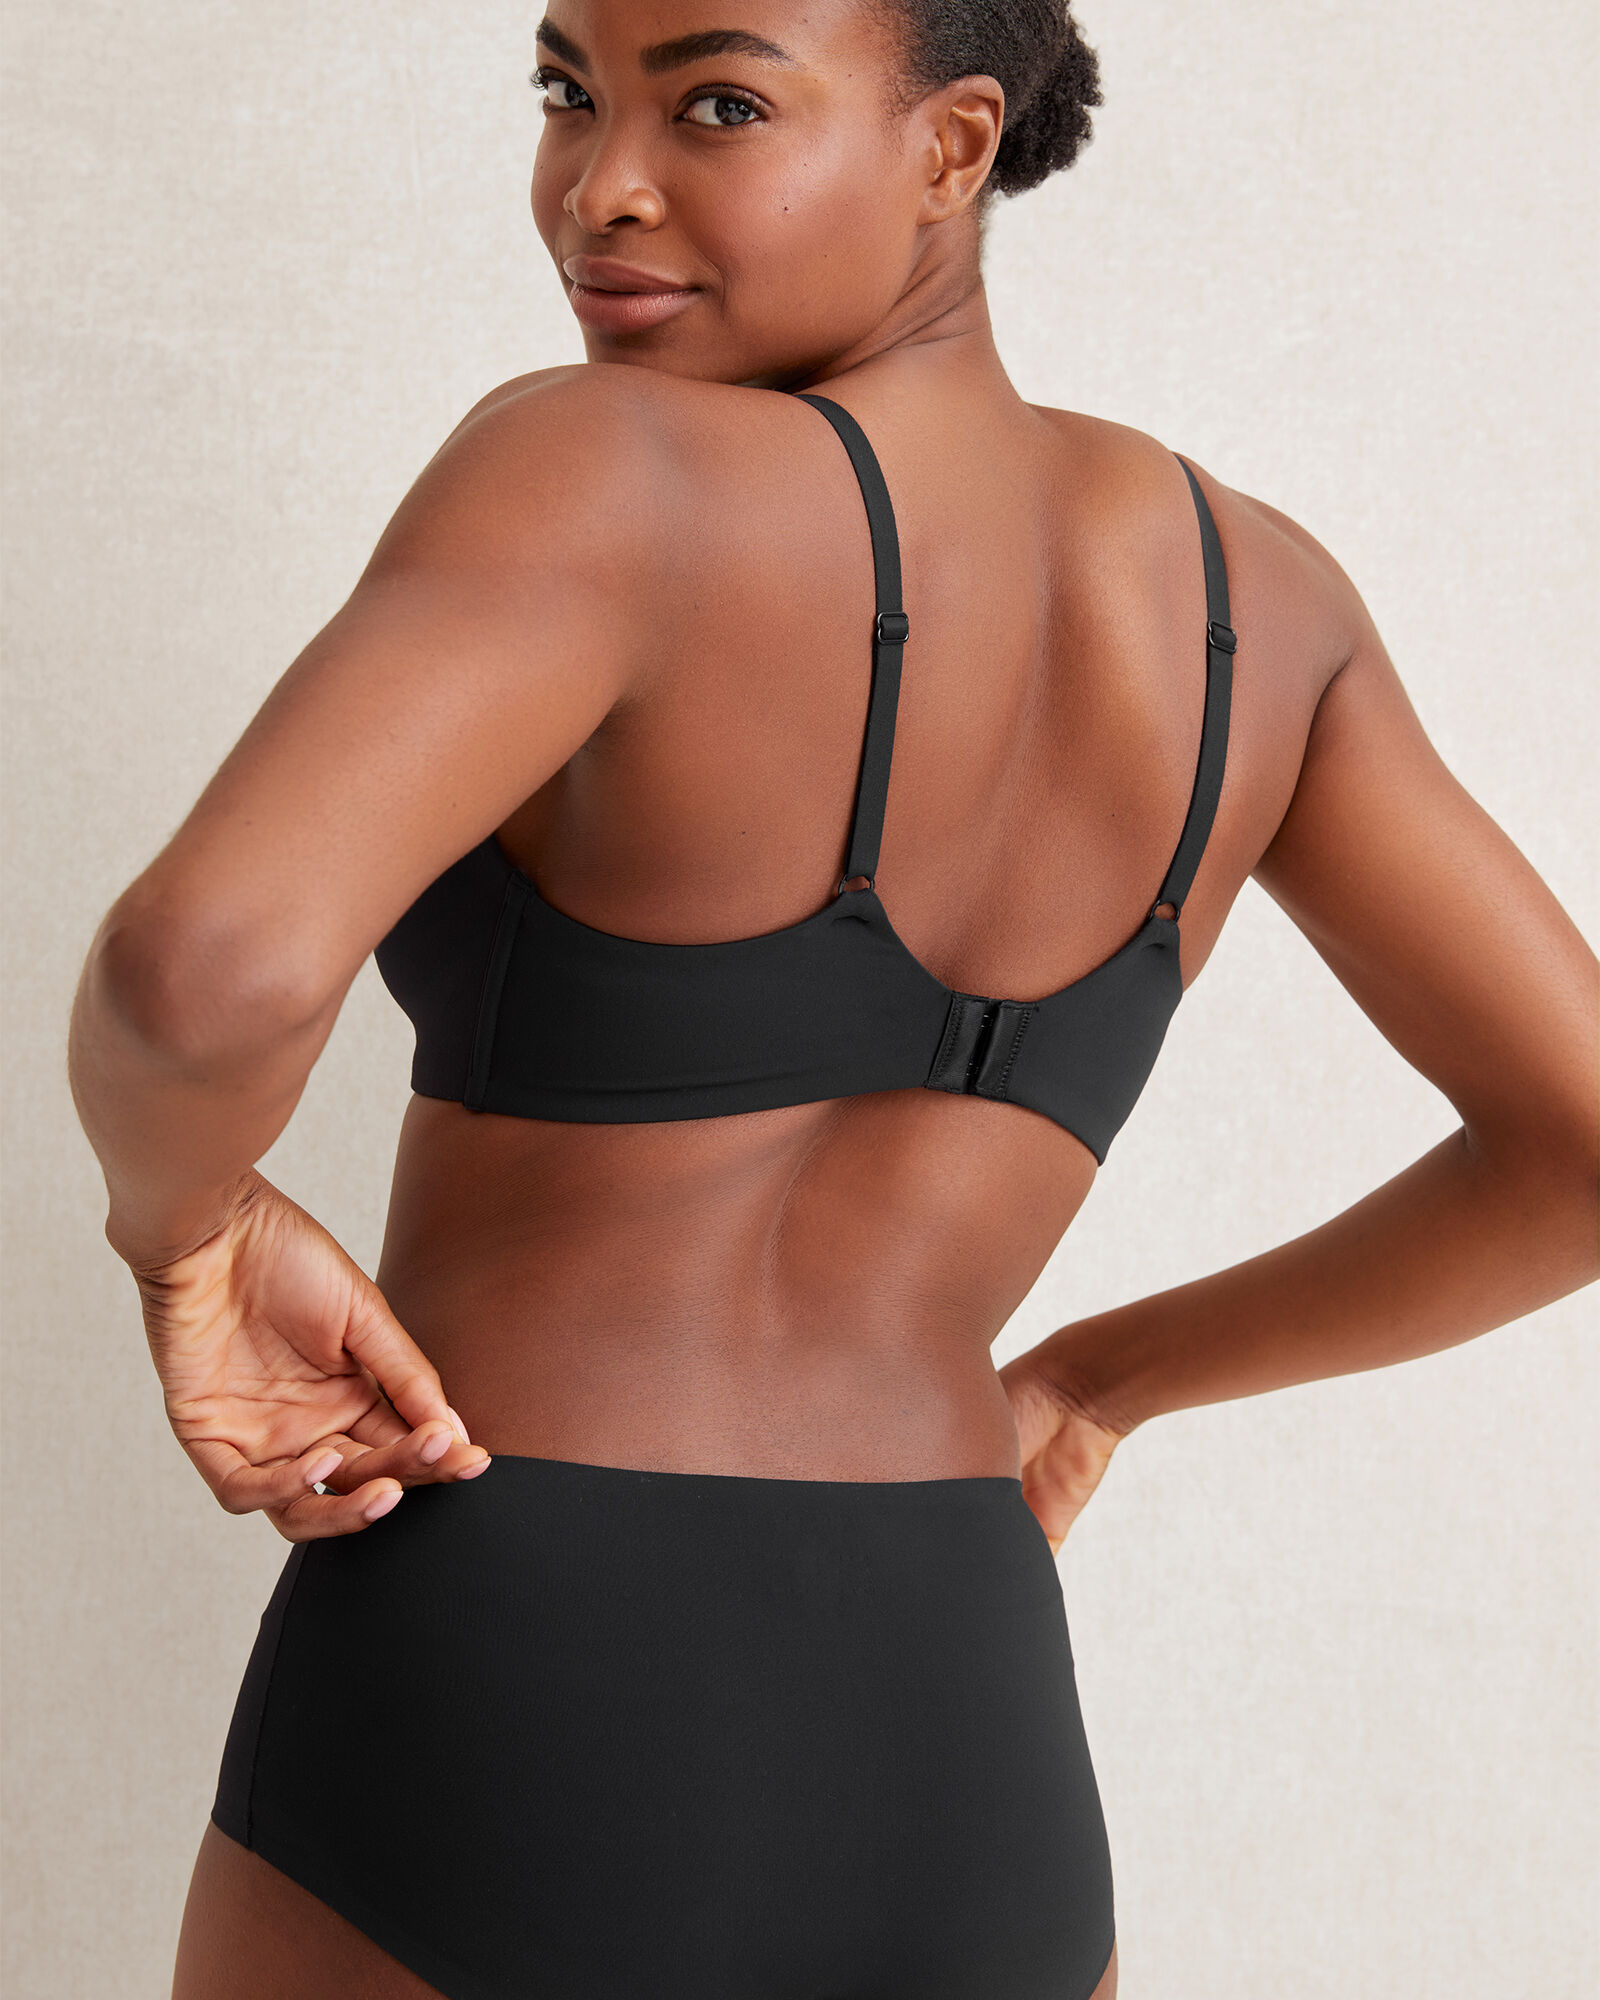 Secrets Behind the Comfort & Support of Wirefree Bras Revealed -  FashionWindows